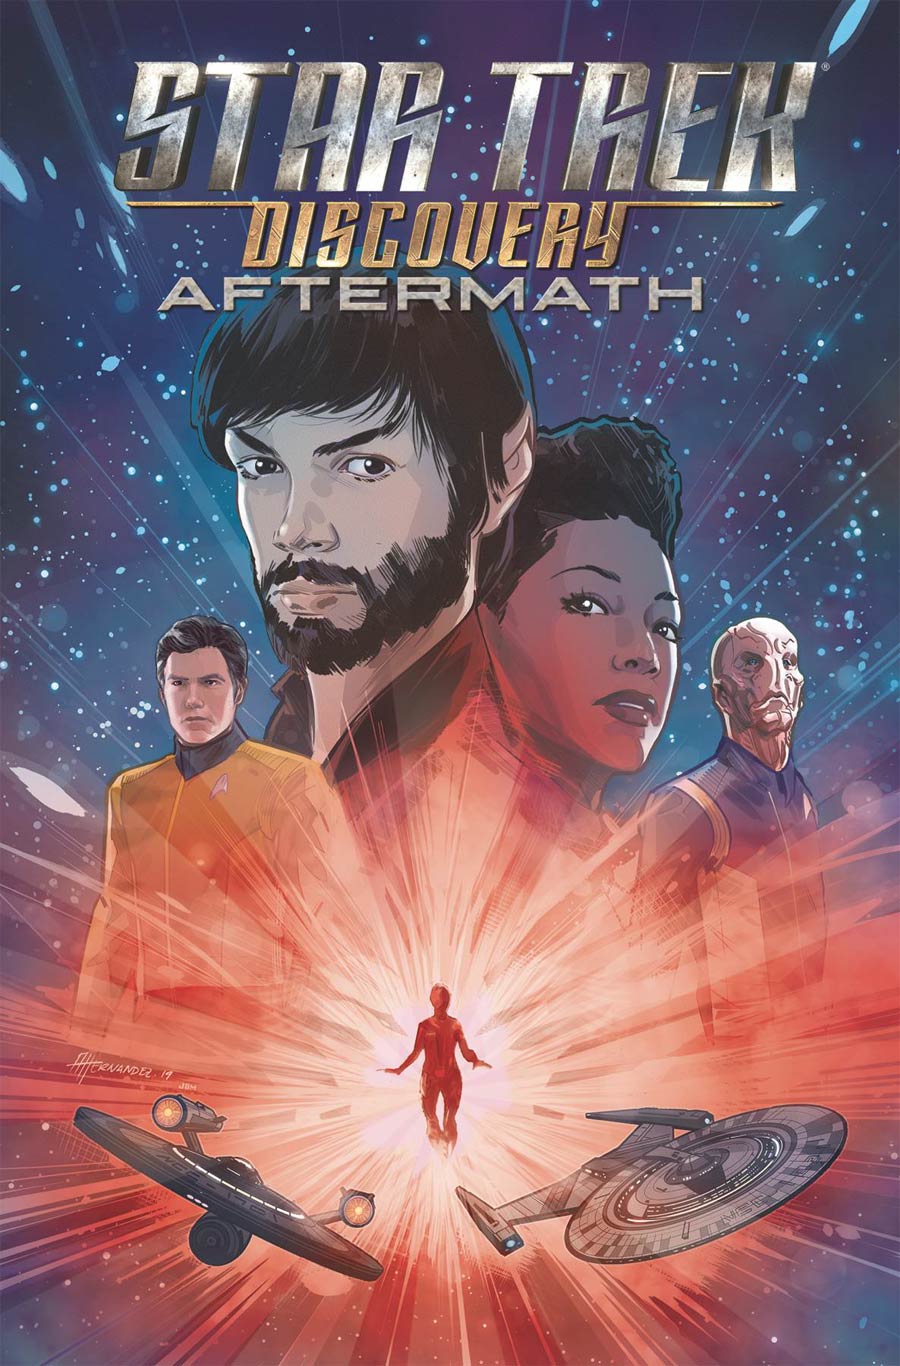 Star Trek Discovery Aftermath TP